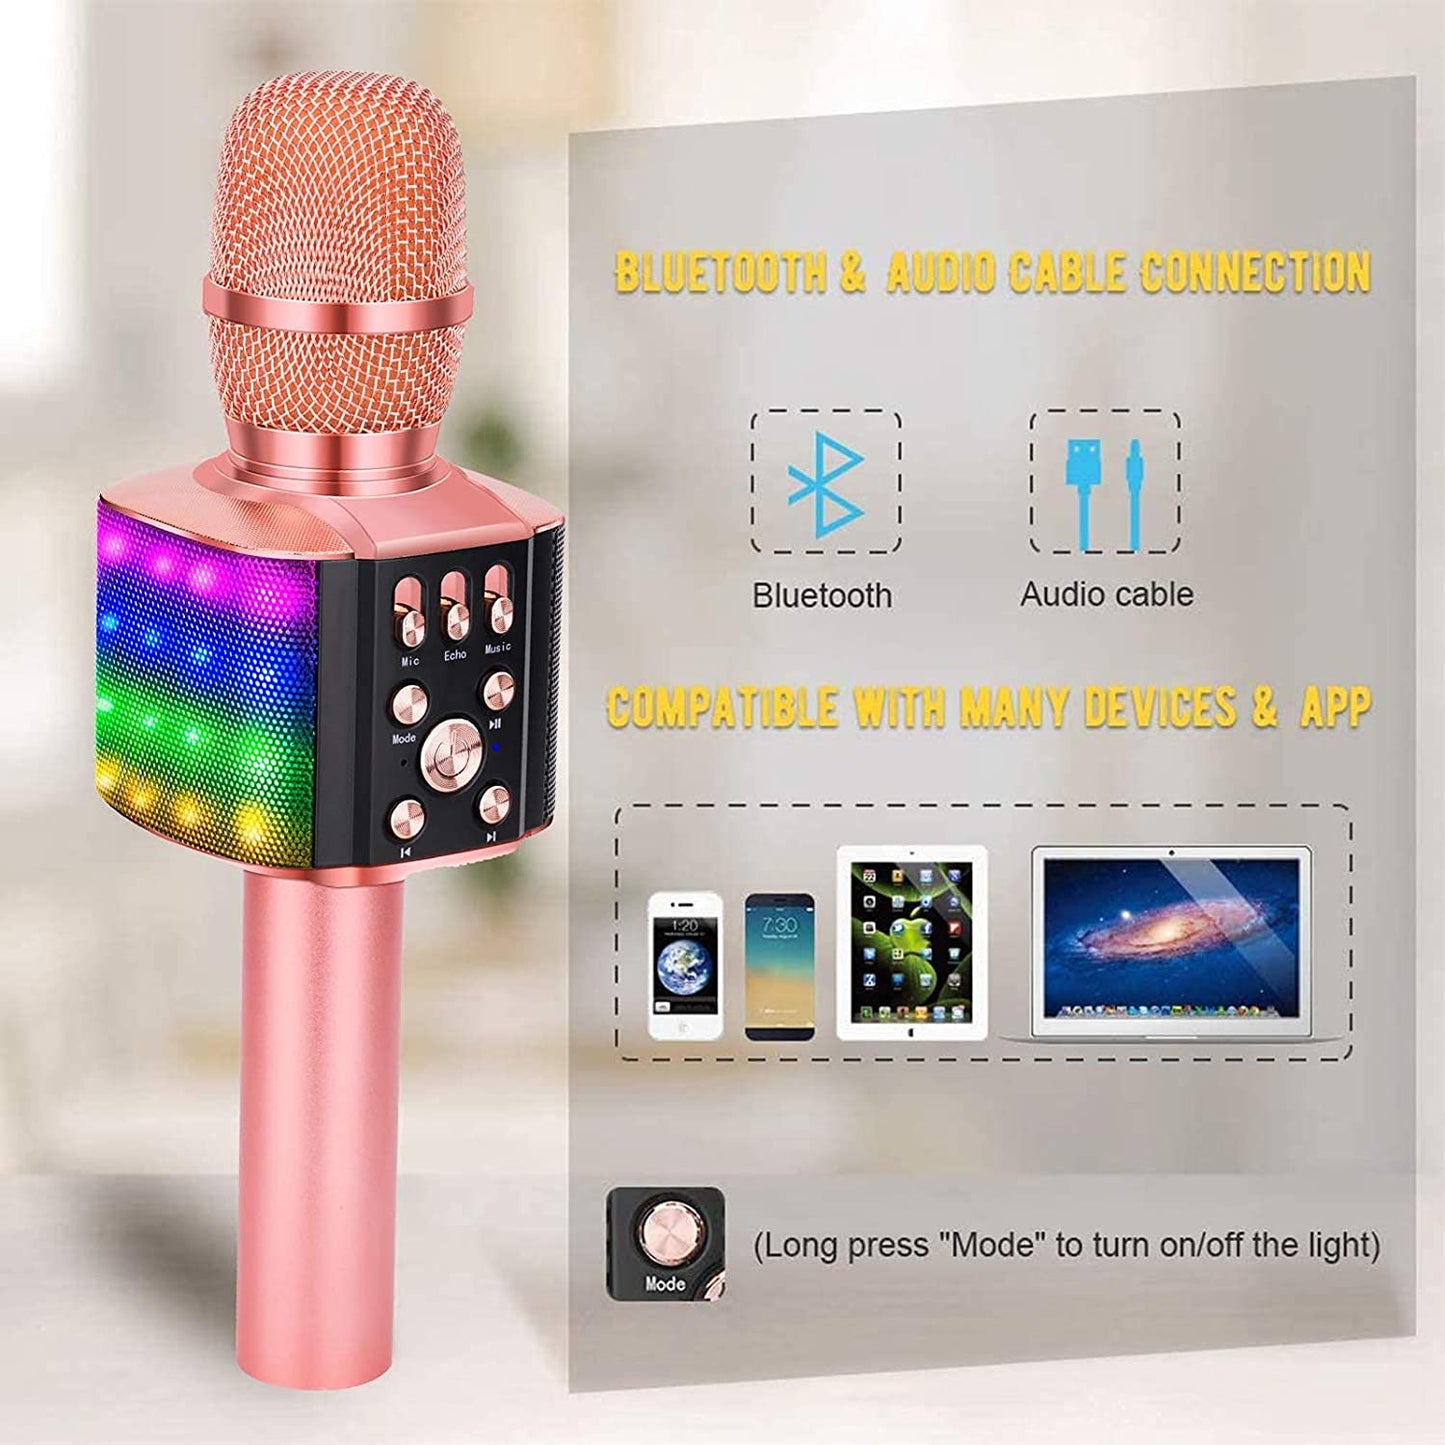 BONAOK Wireless Bluetooth Karaoke Microphone with controllable LED Lights, 4 in 1 Portable Karaoke Machine Speaker for Android/iPhone/PC (Rose Gold)